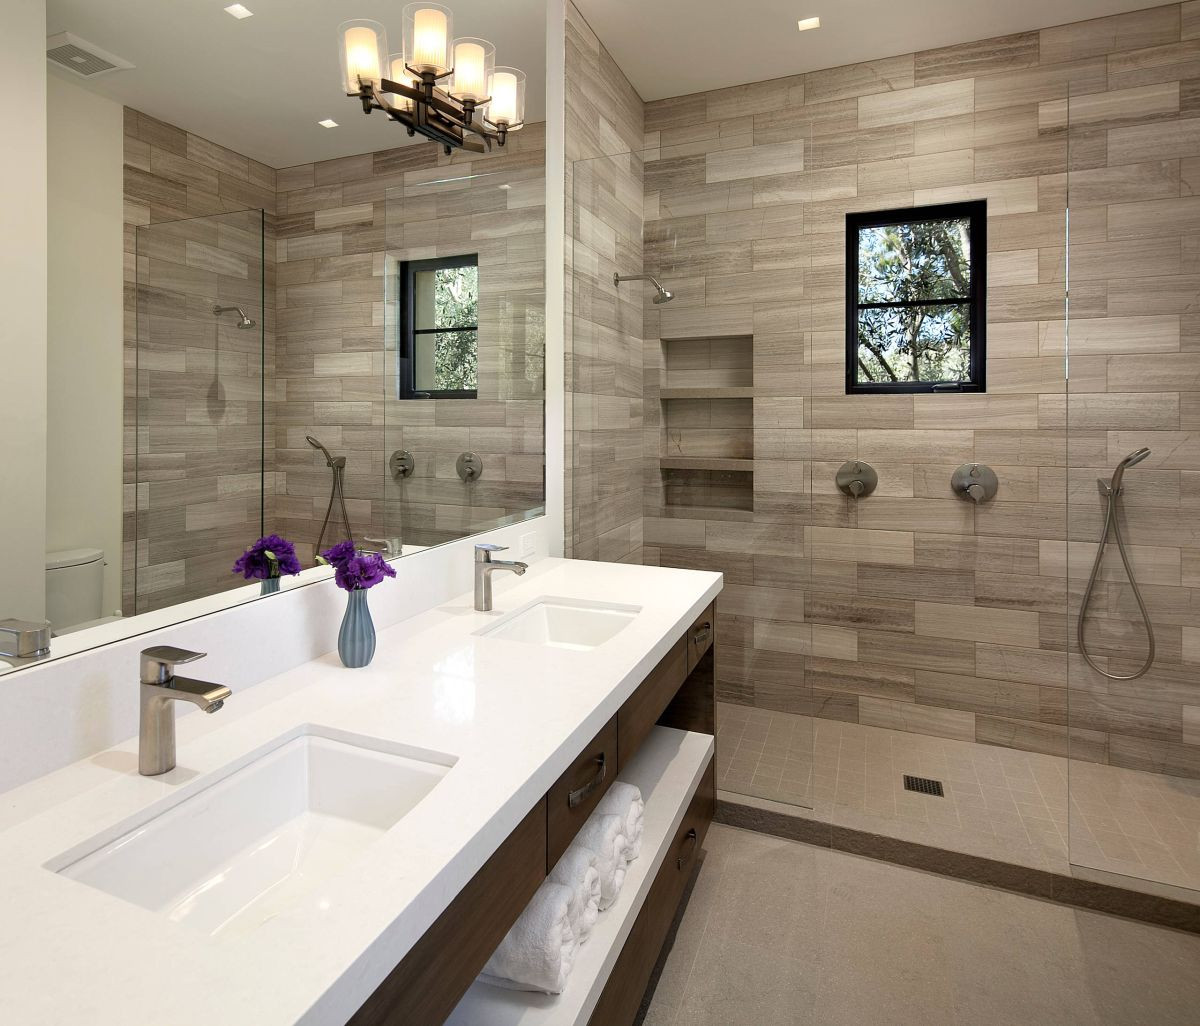 Wood Tile In Bathrooms
 15 Wood Tile Showers For Your Bathroom